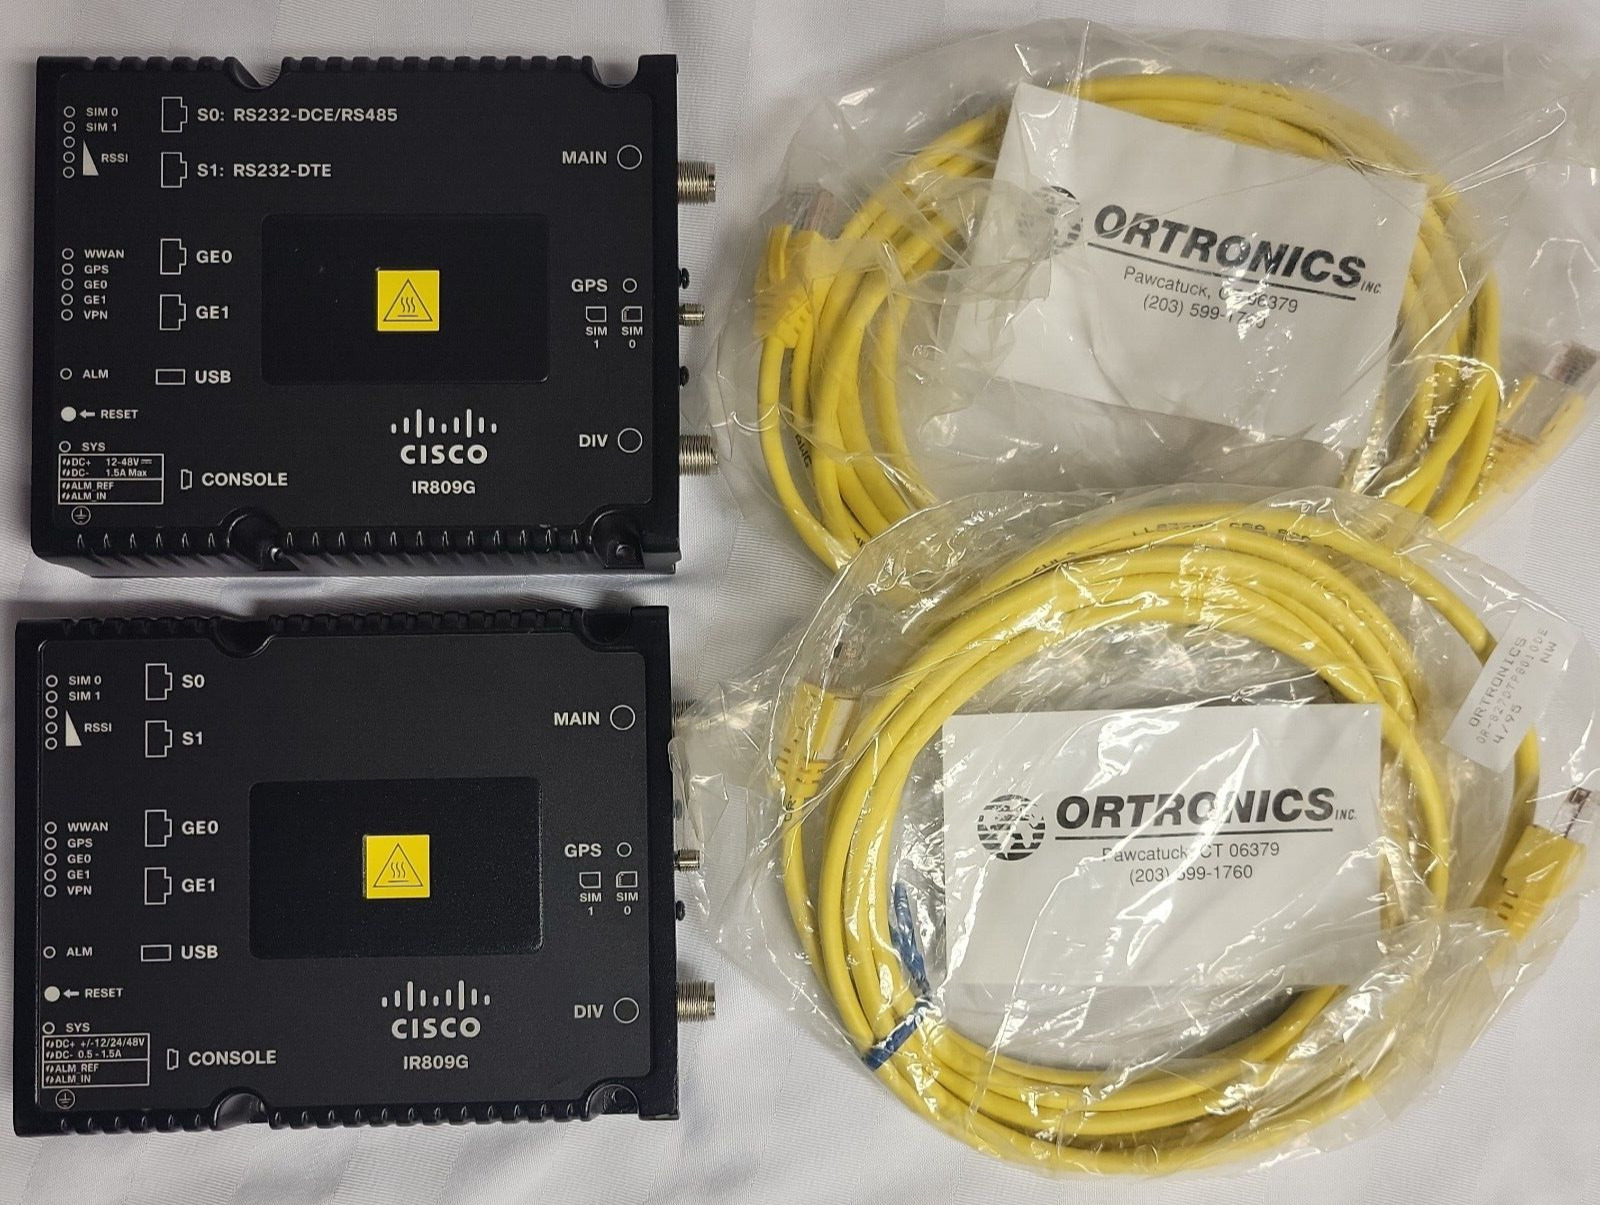 Lot 2x CISCO IR809G-LTE-NA-K9 V04 INTEGRATED SERVICES ROUTER 4G LTE 3G 2G AT&T